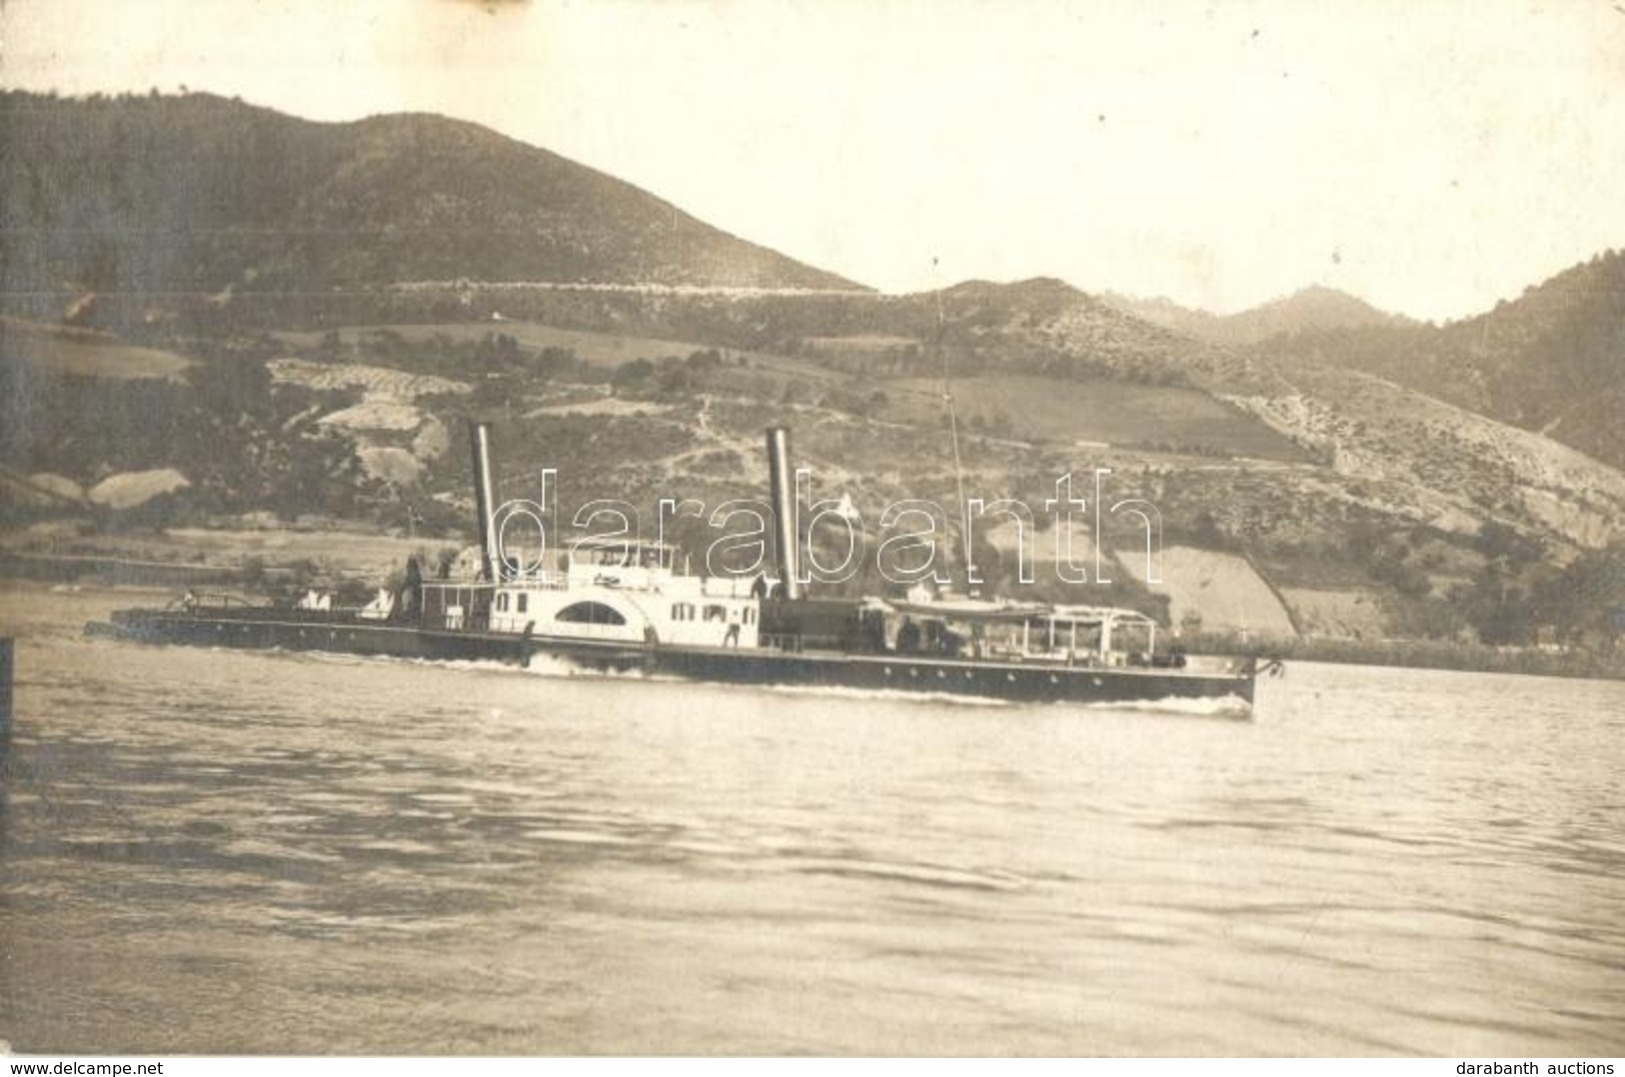 ** T2/T3 Orsova, Daniel Vontato Es Szallito G?zhajo / Towing And Carrying Steamship, Photo (fl) - Unclassified